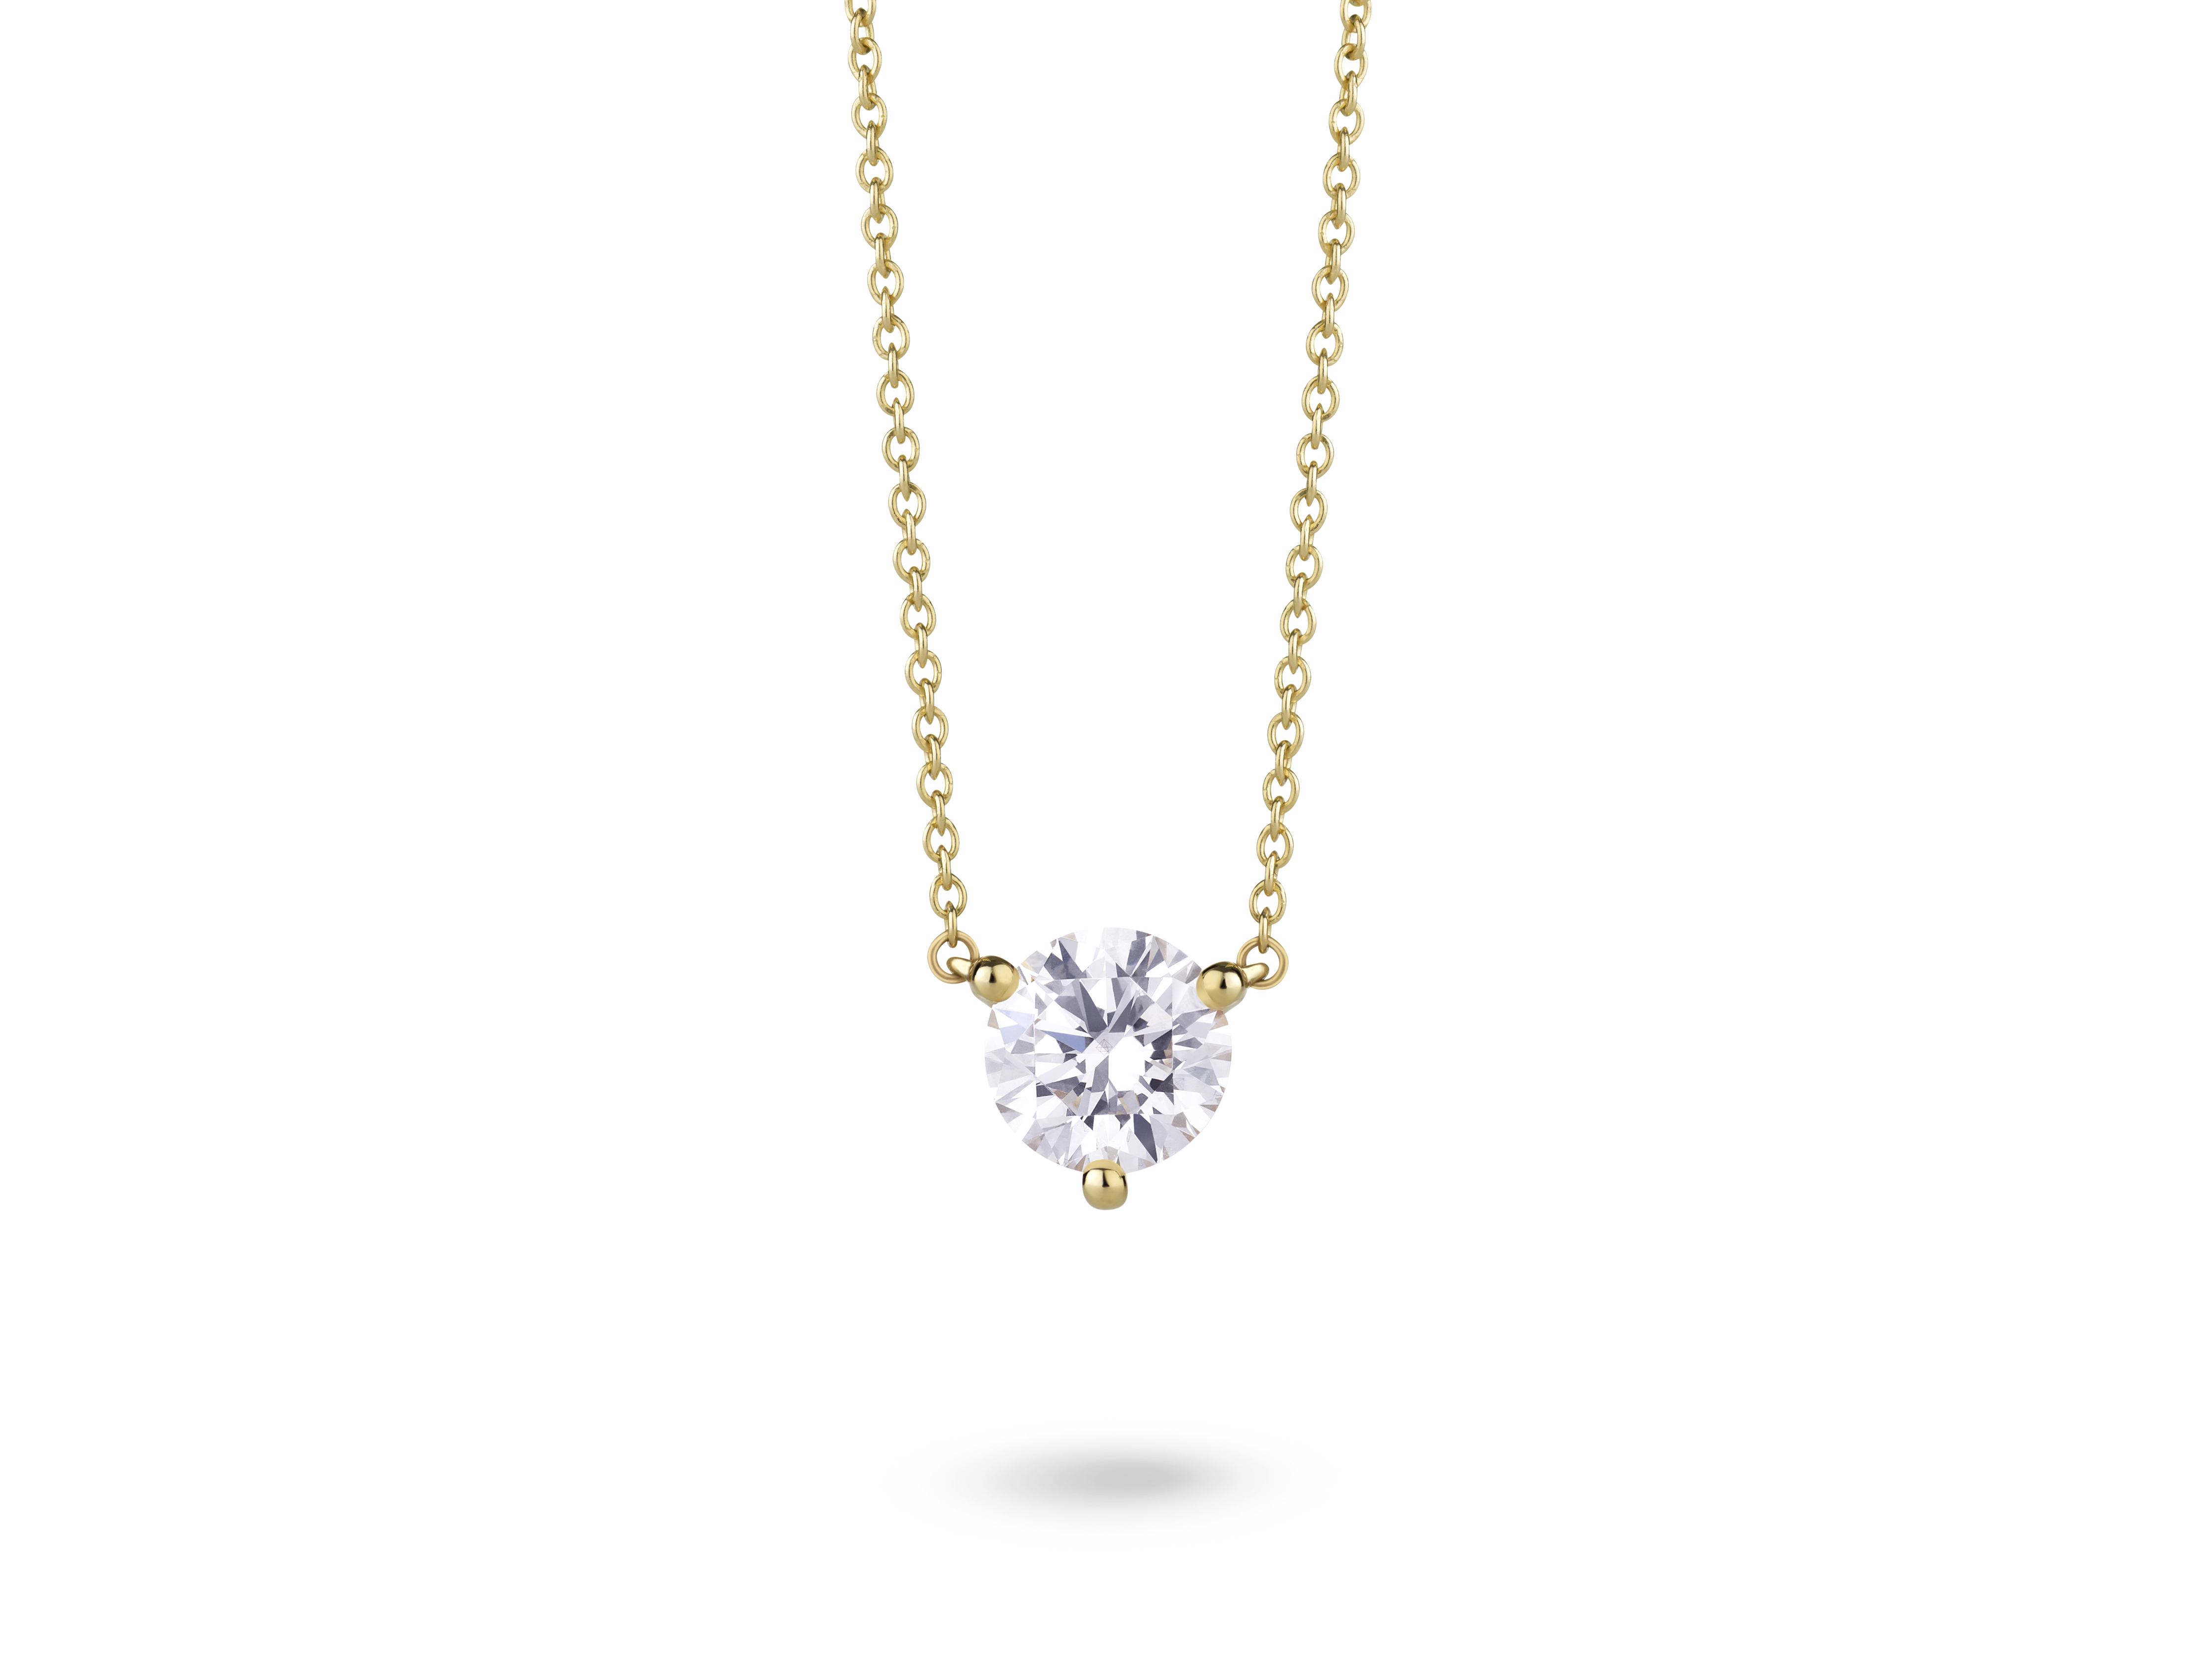 Front view of 1 carat round brilliant pendant in 10k yellow gold